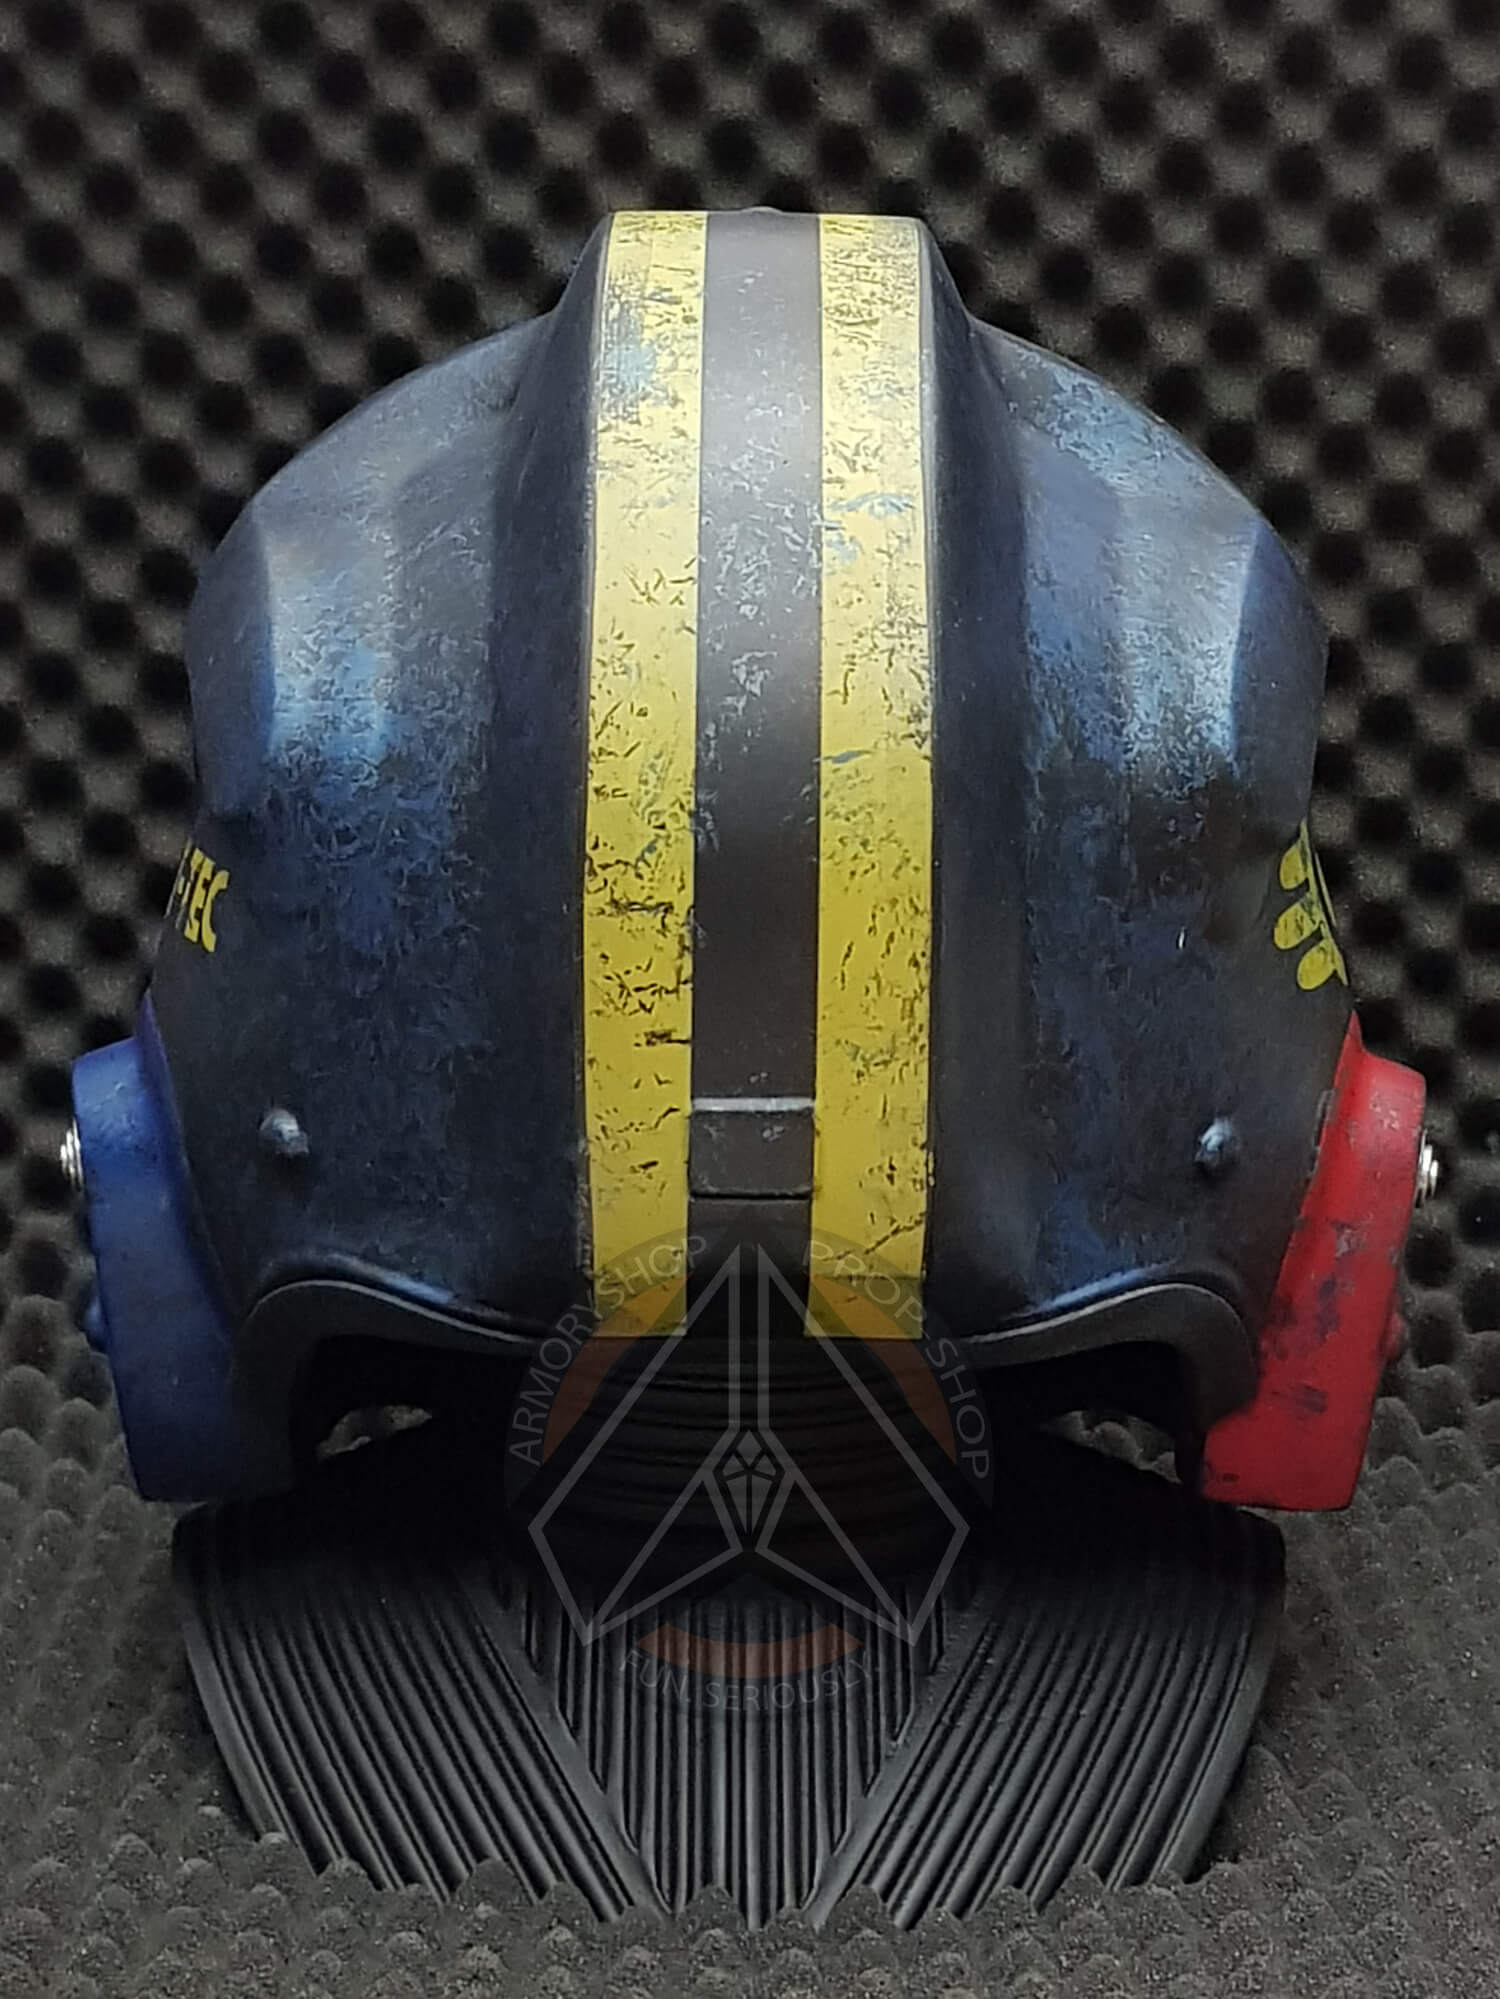 The 13th - R1 Imperial TIE Helmet (Art Project)